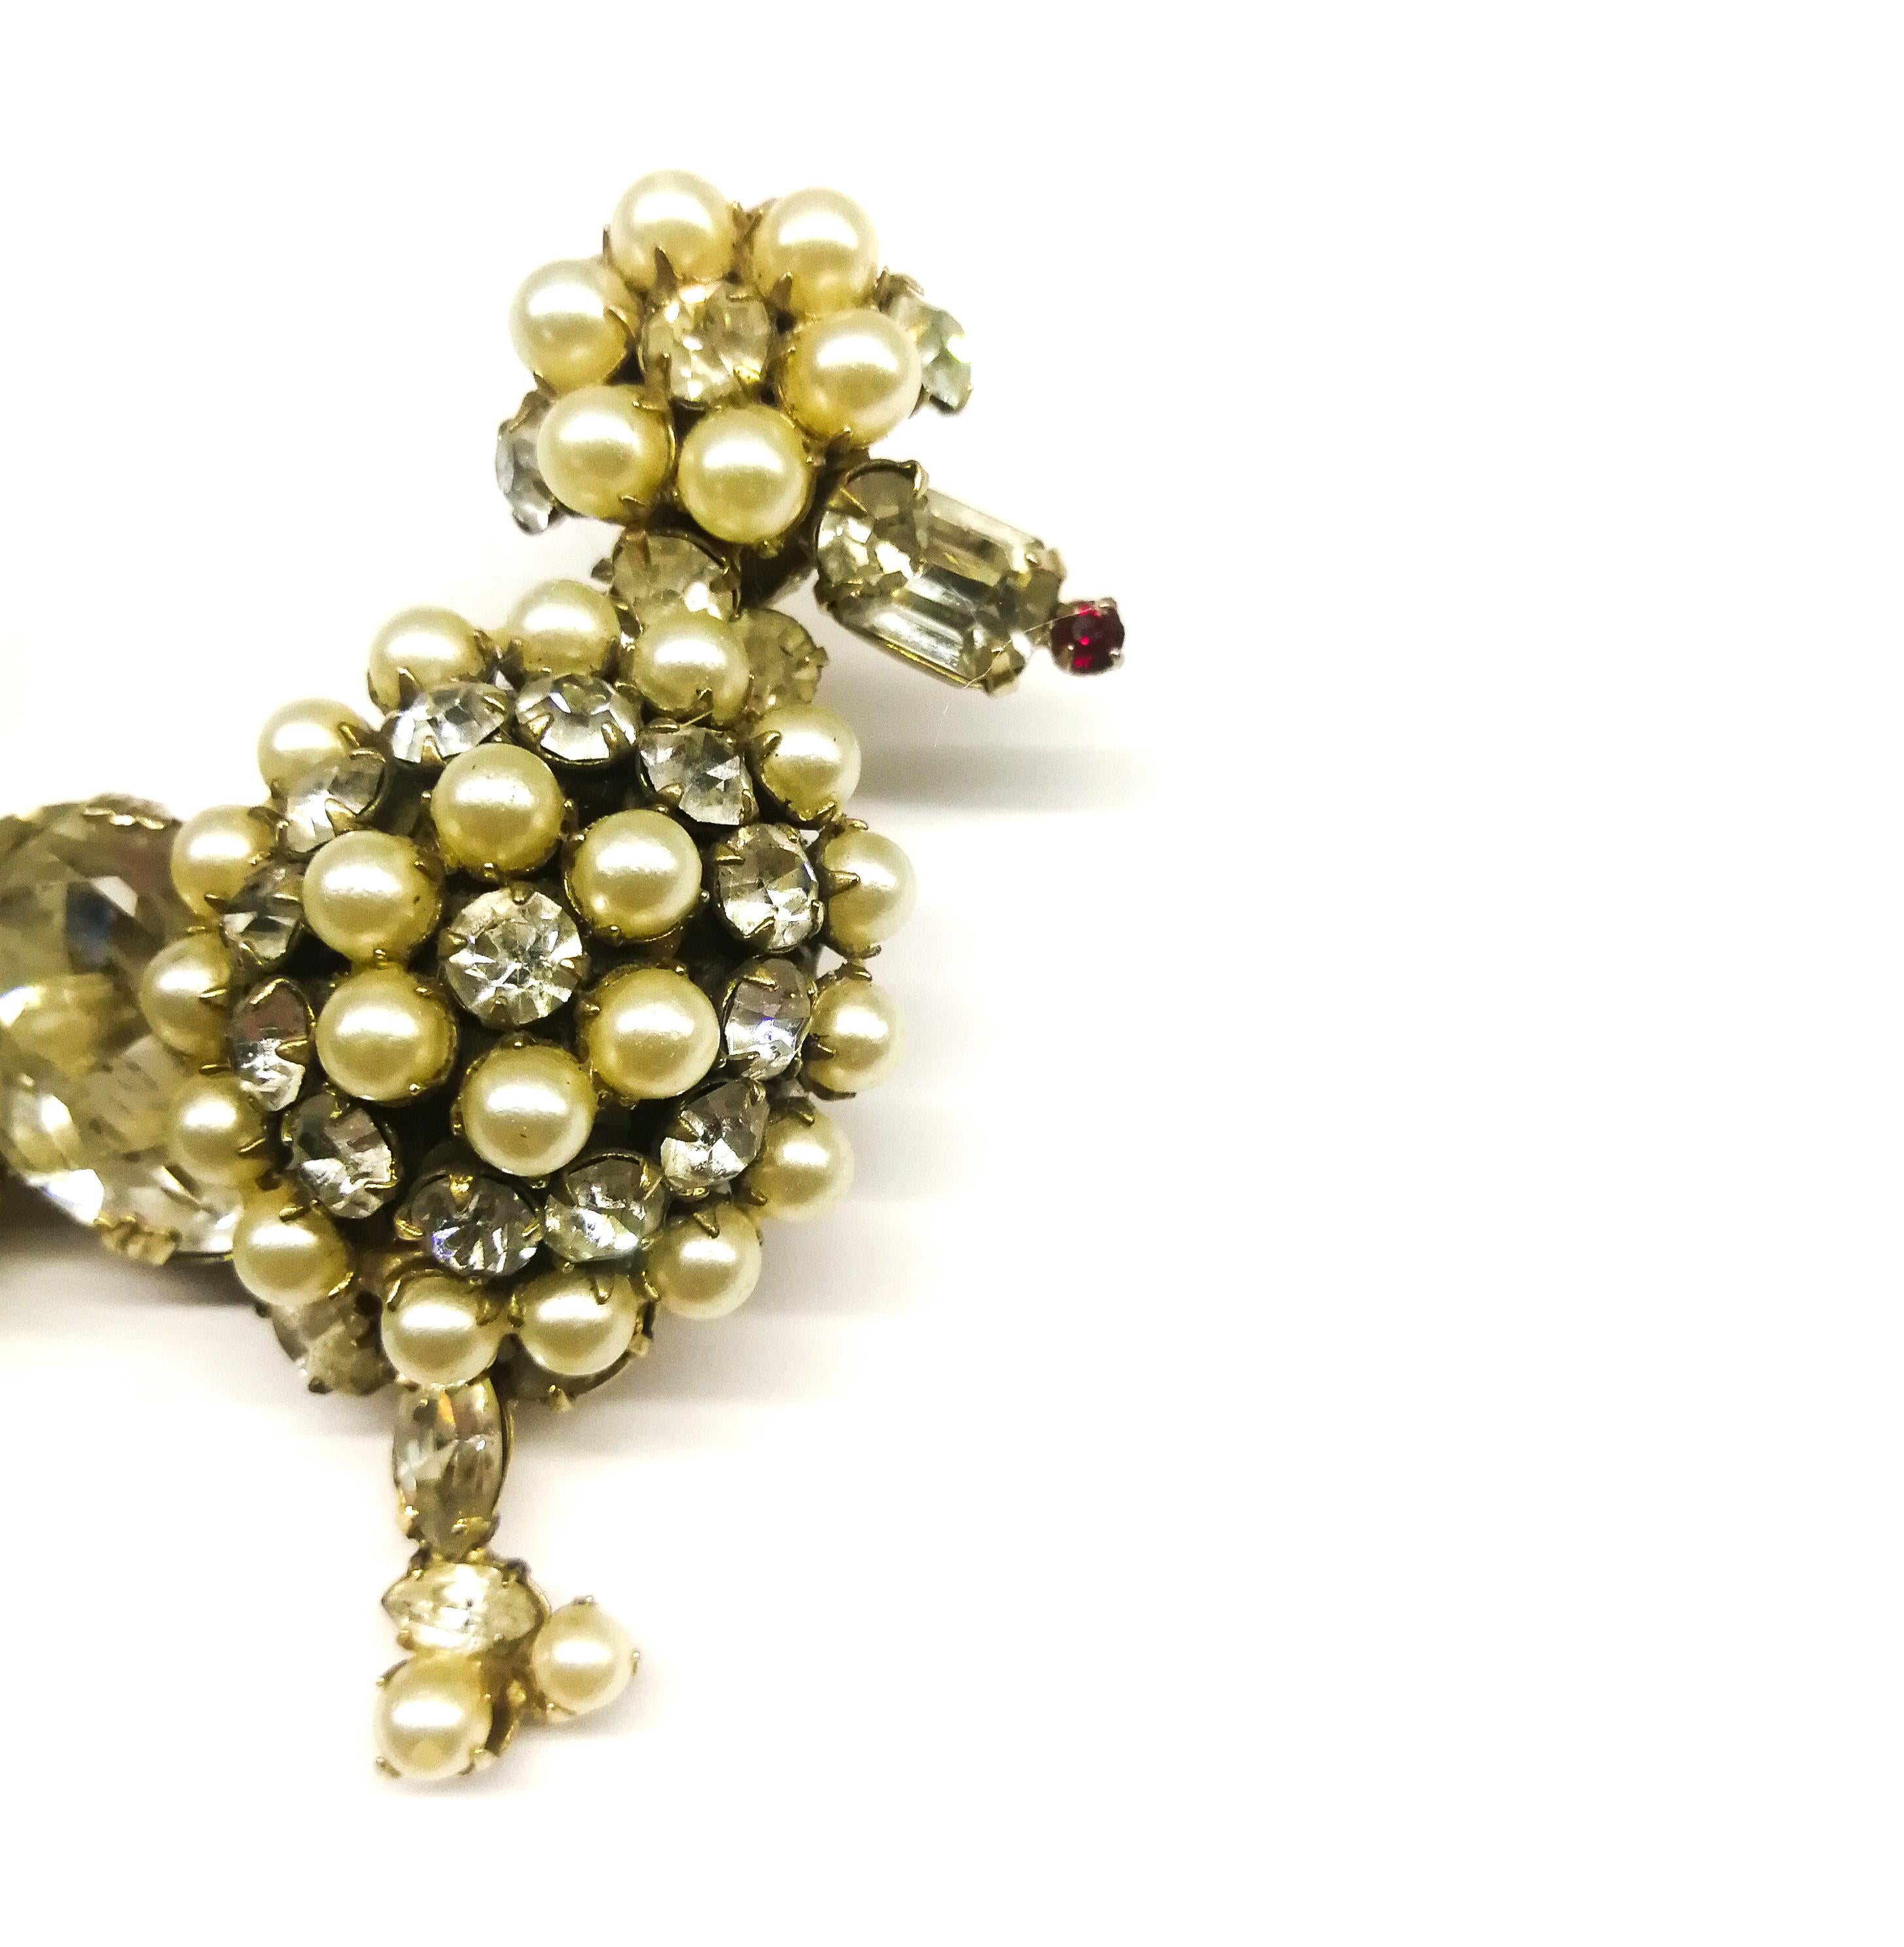 A charming and amusing clear paste and paste pearl brooch, in the form of a 'poodle. Beautifully modeled, with a small red nose as a highlight, and a single pearl atop its tail, a large clear stone as its body, the pearl and paste combination make a